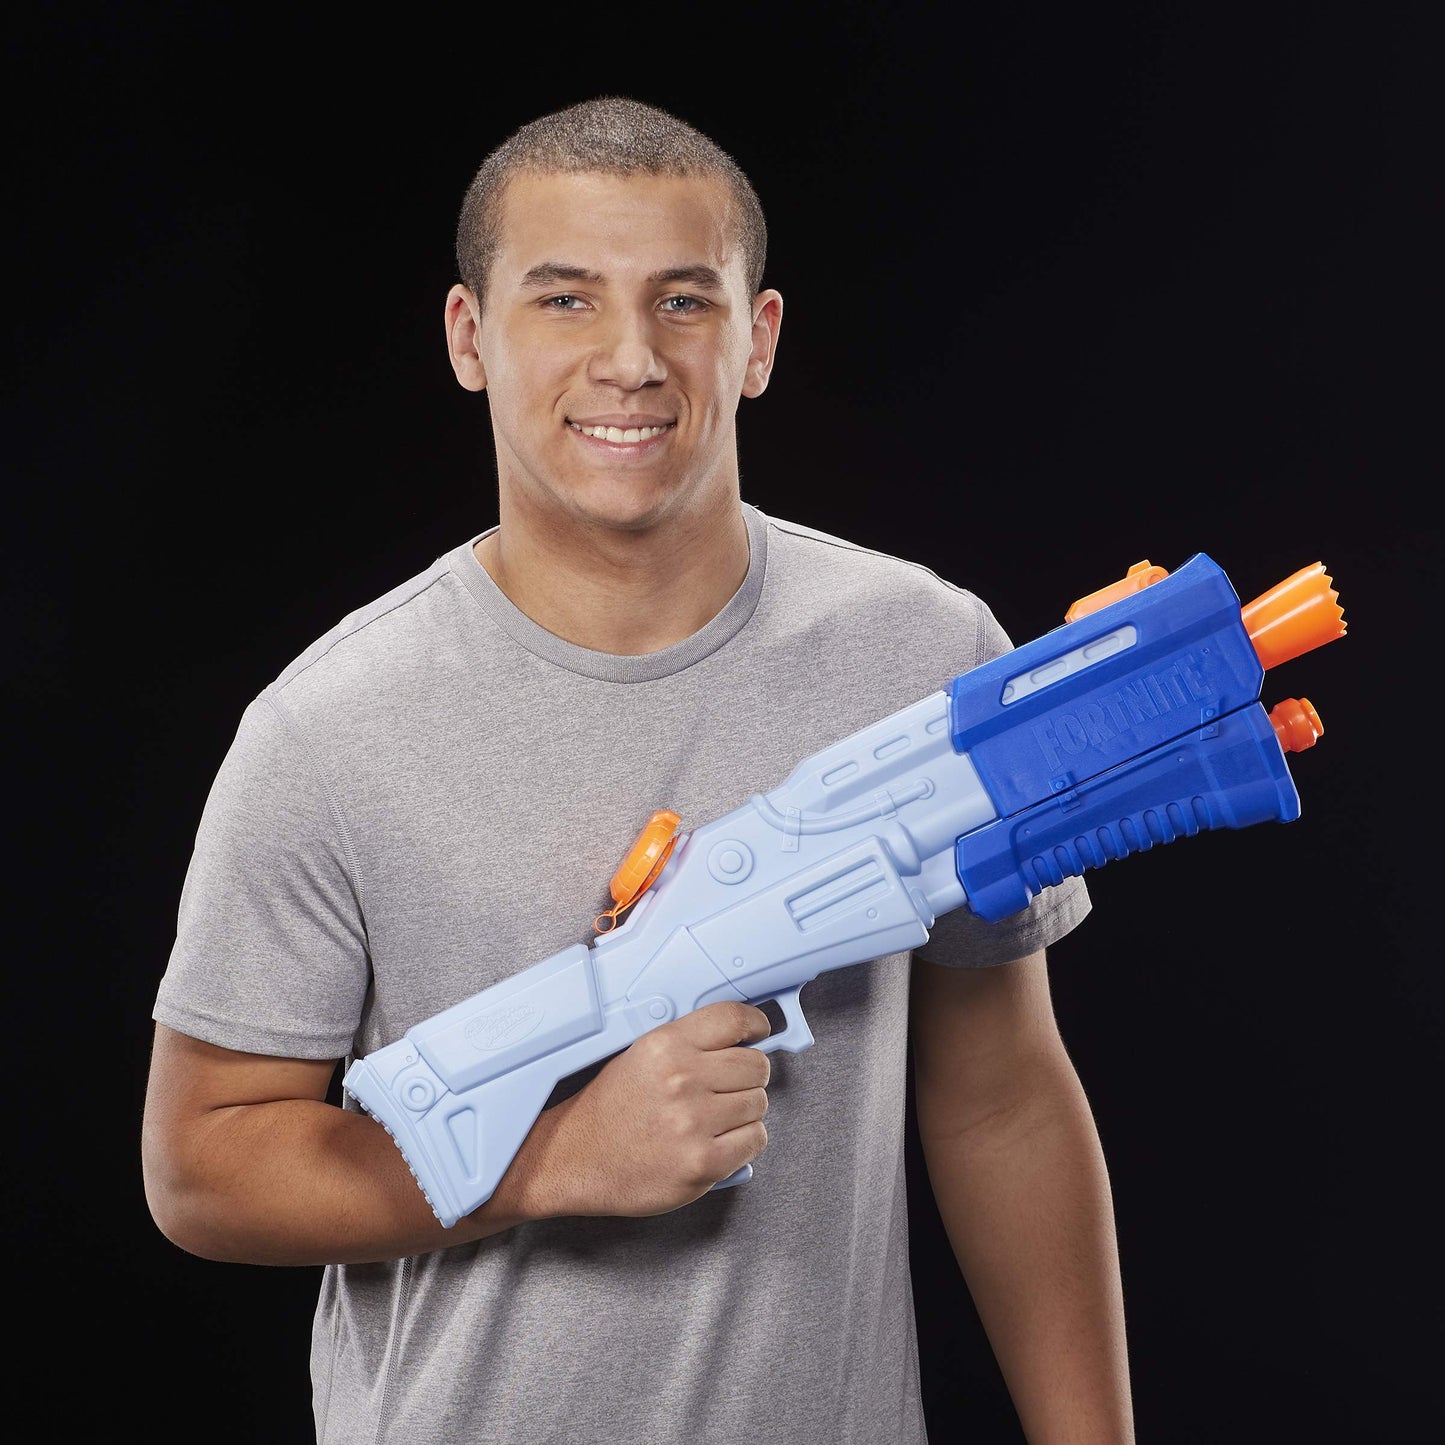 Fortnite TS-R Nerf Super Soaker Water Blaster Toy -- Pump Action -- 36 Fluid Ounce Capacity -- for Kids, Teens, Adults